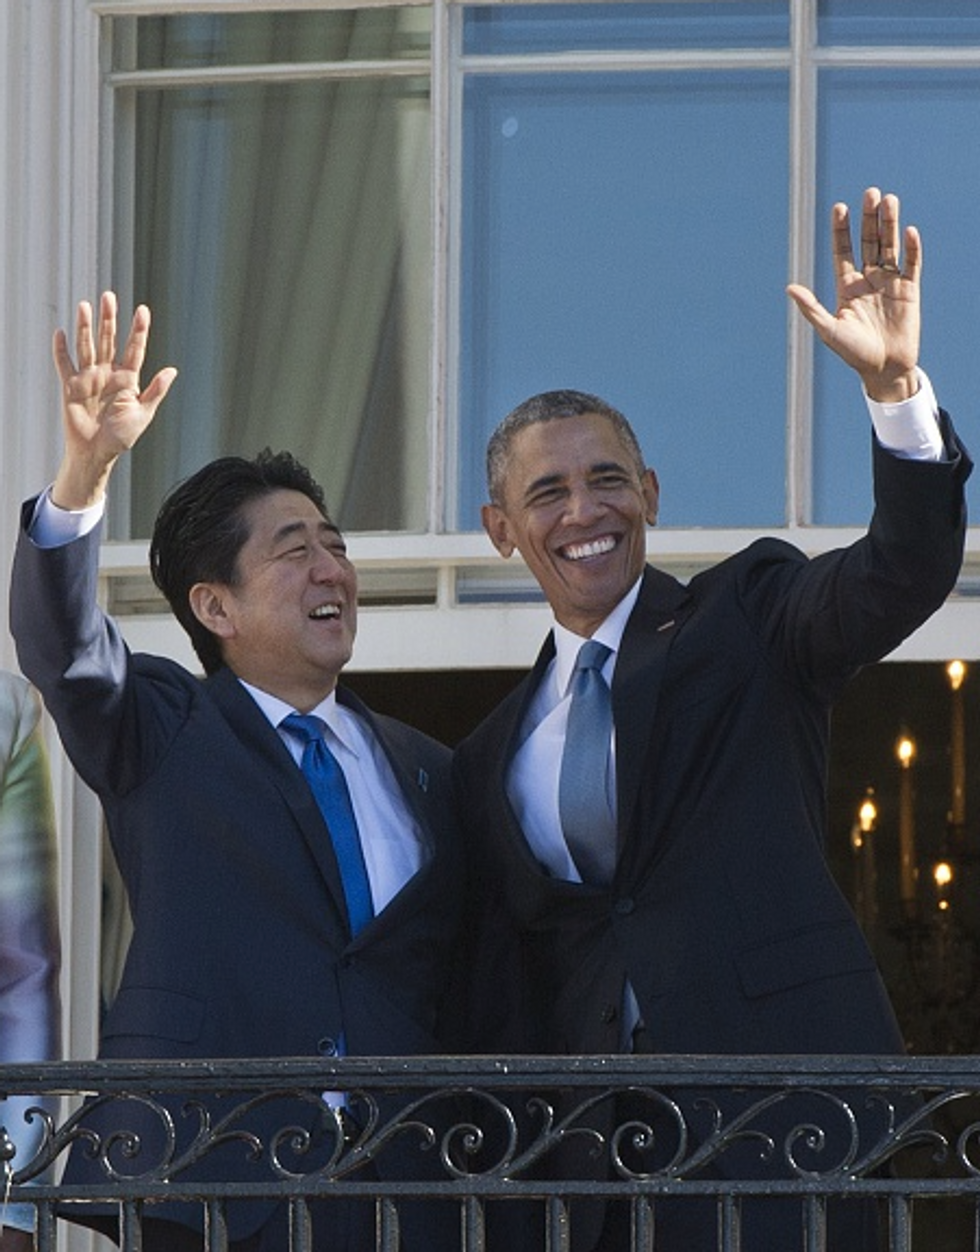 Check out Obama’s pronunciation of what he hails as Japan's greatest gifts to U.S.